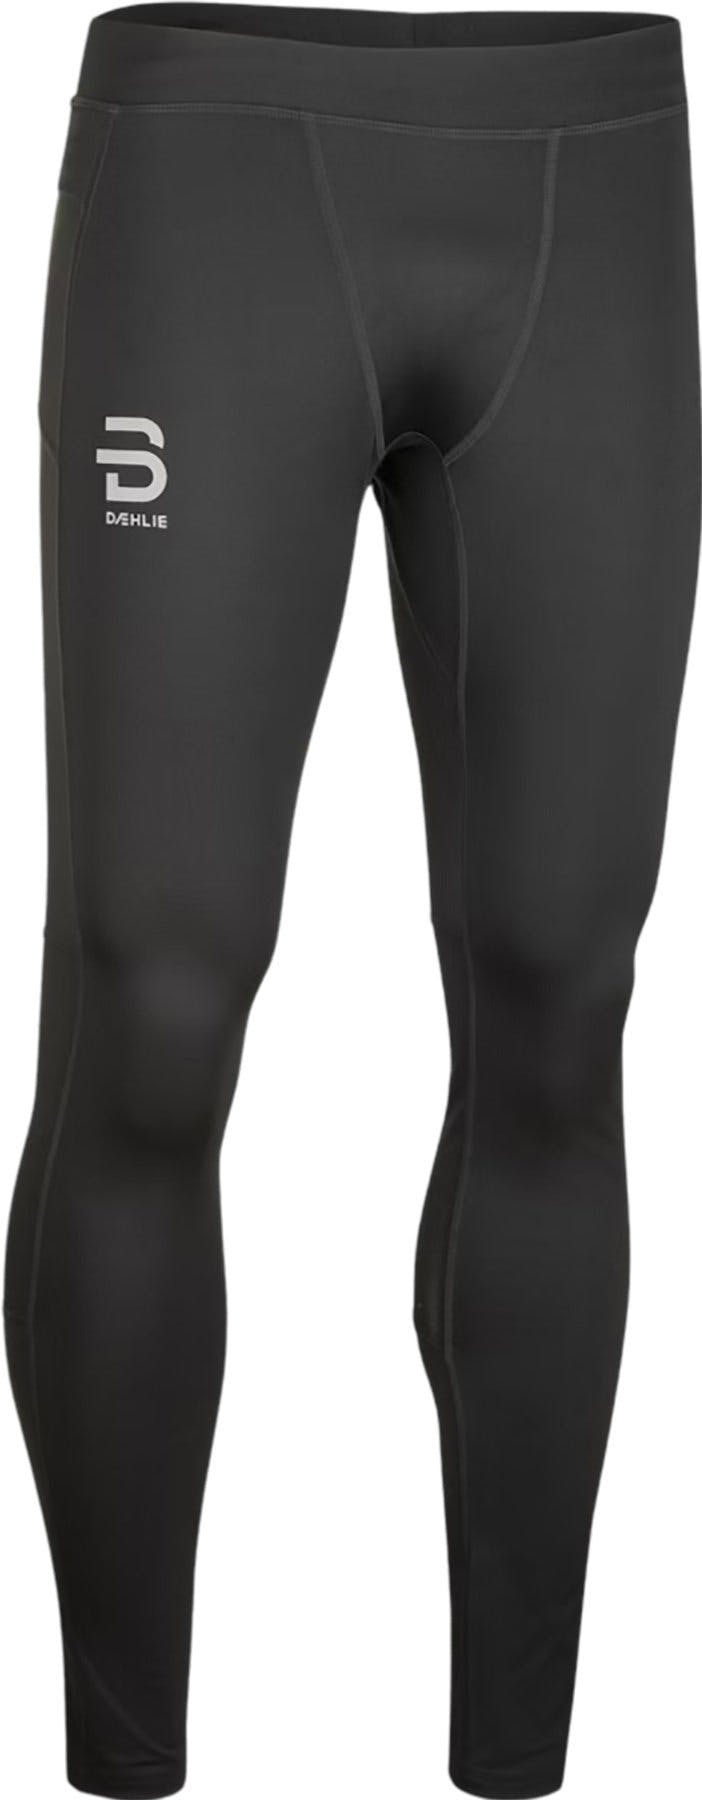 Product image for Direction Tights - Men's